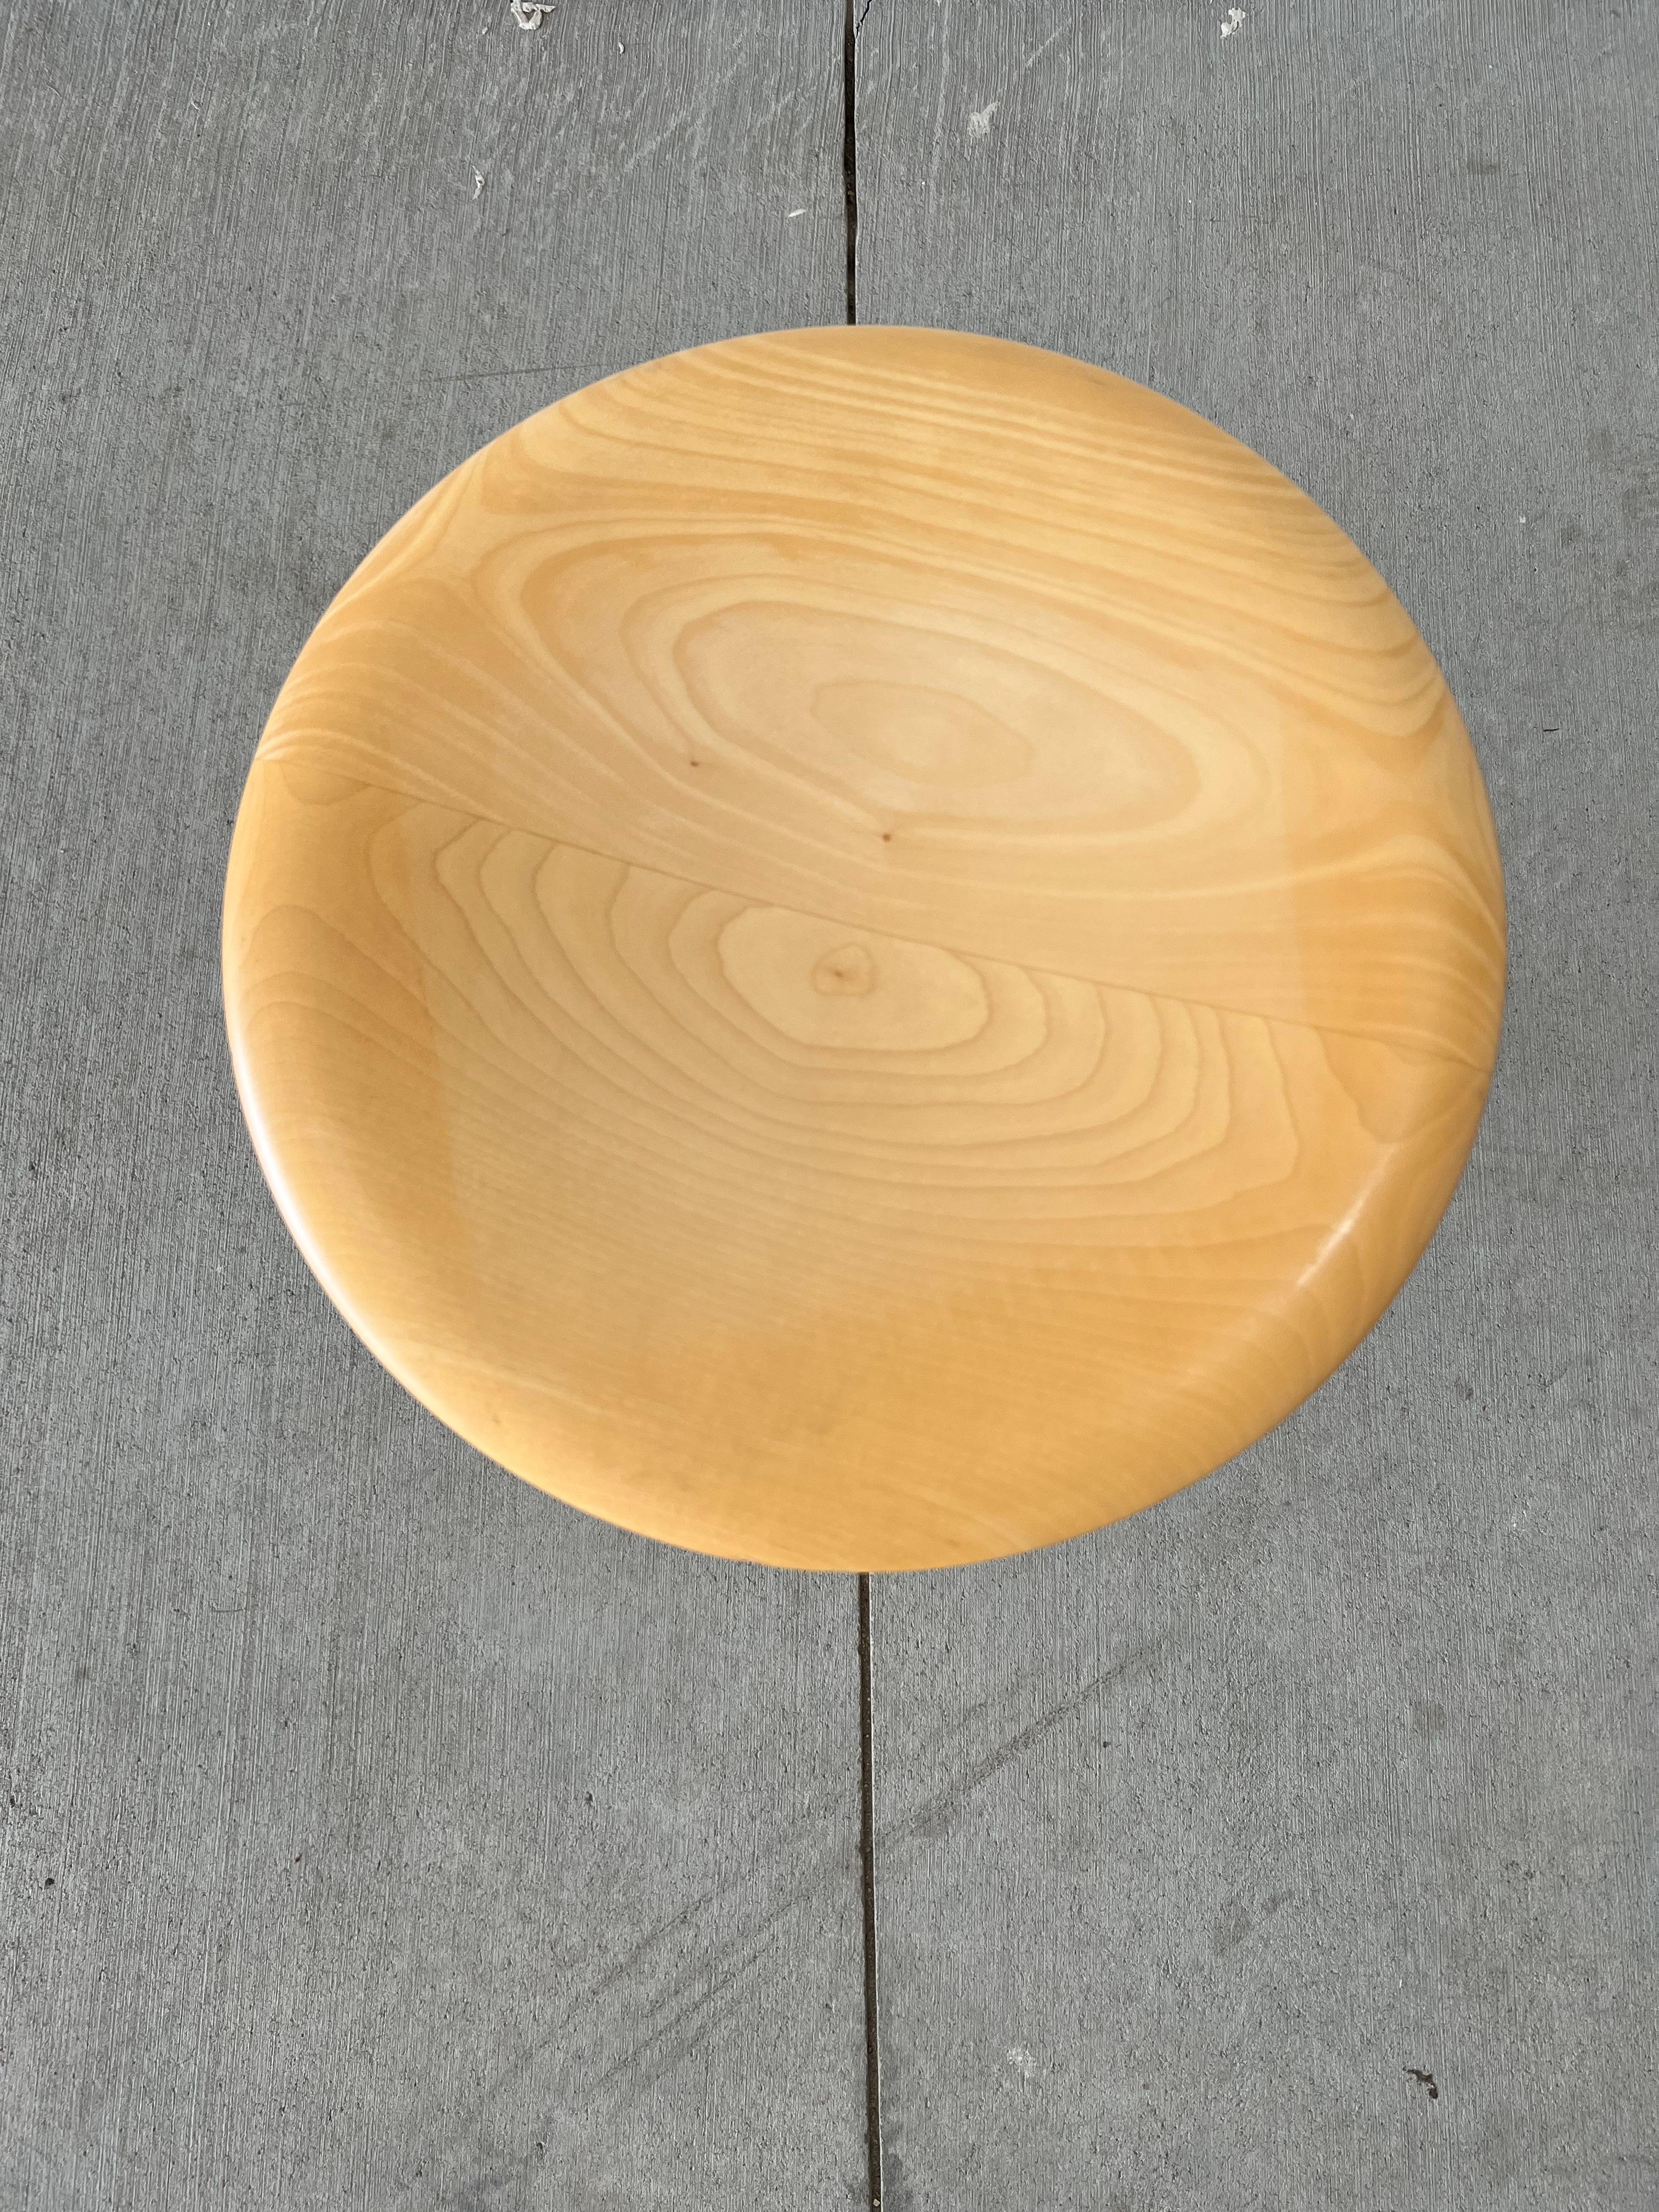 Isamu Noguchi iconic rocking stool in blond wood with polished chrome accents, 14” diameter x 17”high. Vitra production.